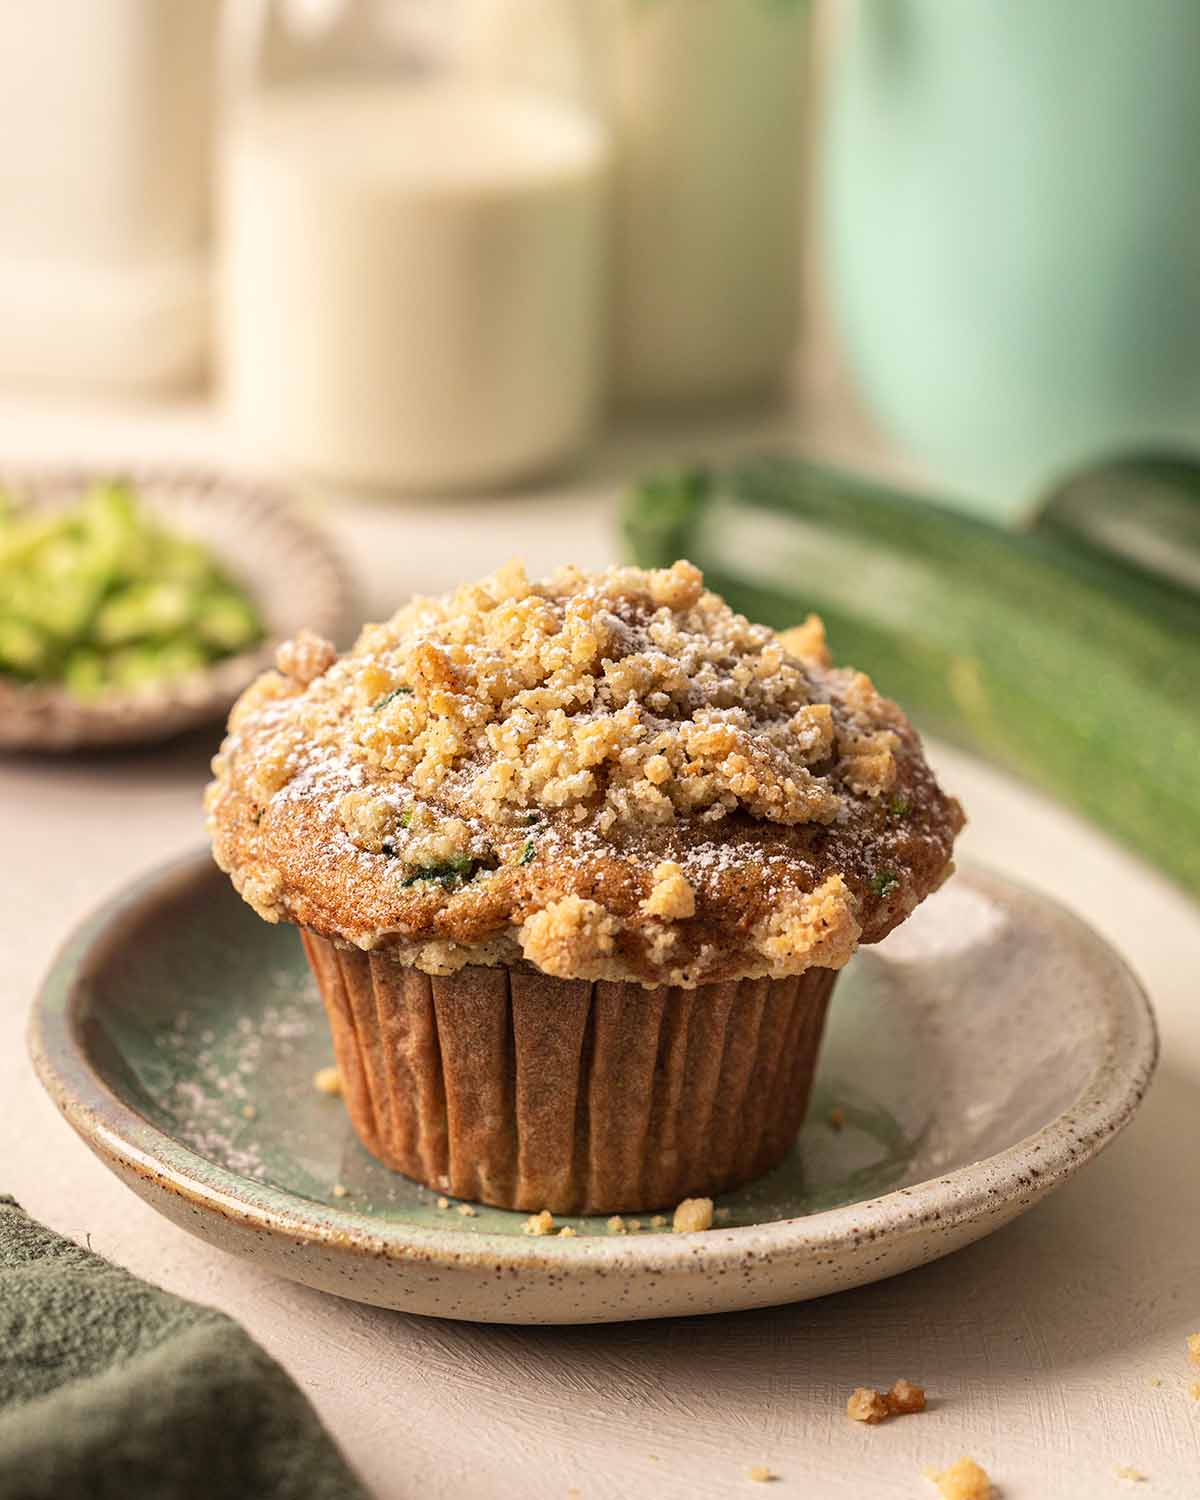 Vegan zucchini muffin with large muffin top and lightly dusted with powdered sugar.